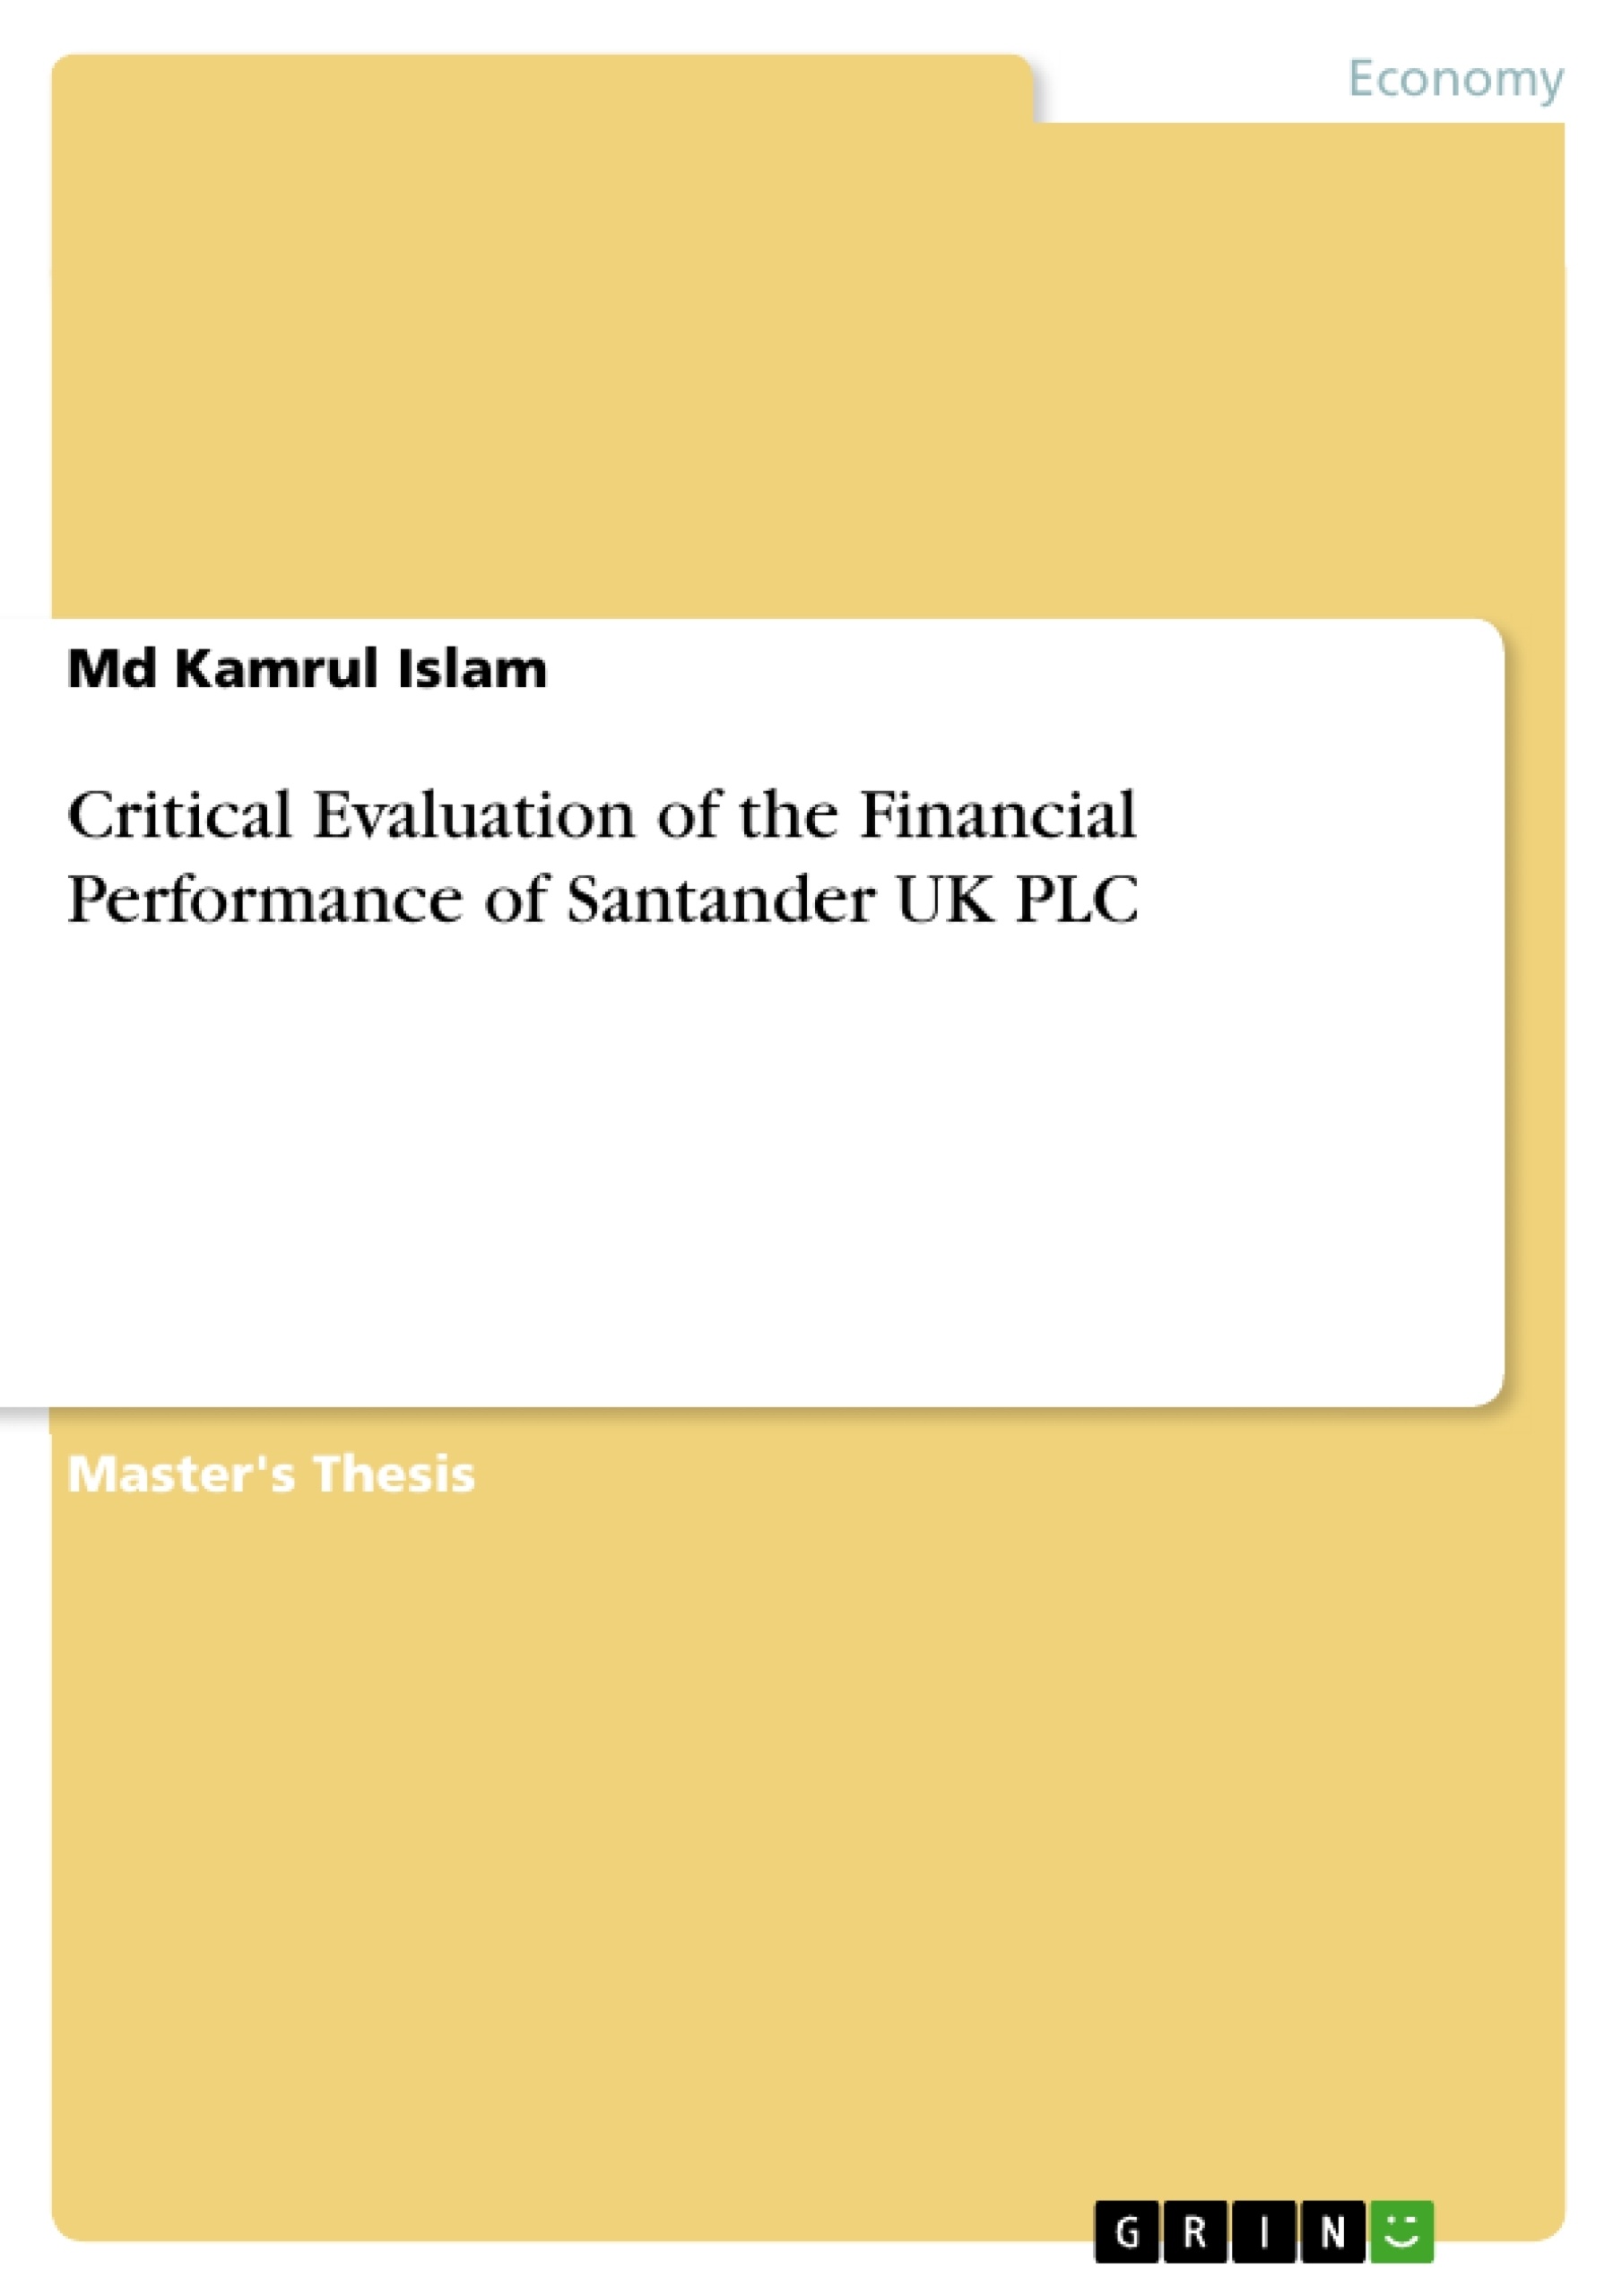 Title: Critical Evaluation of the Financial Performance of Santander UK PLC